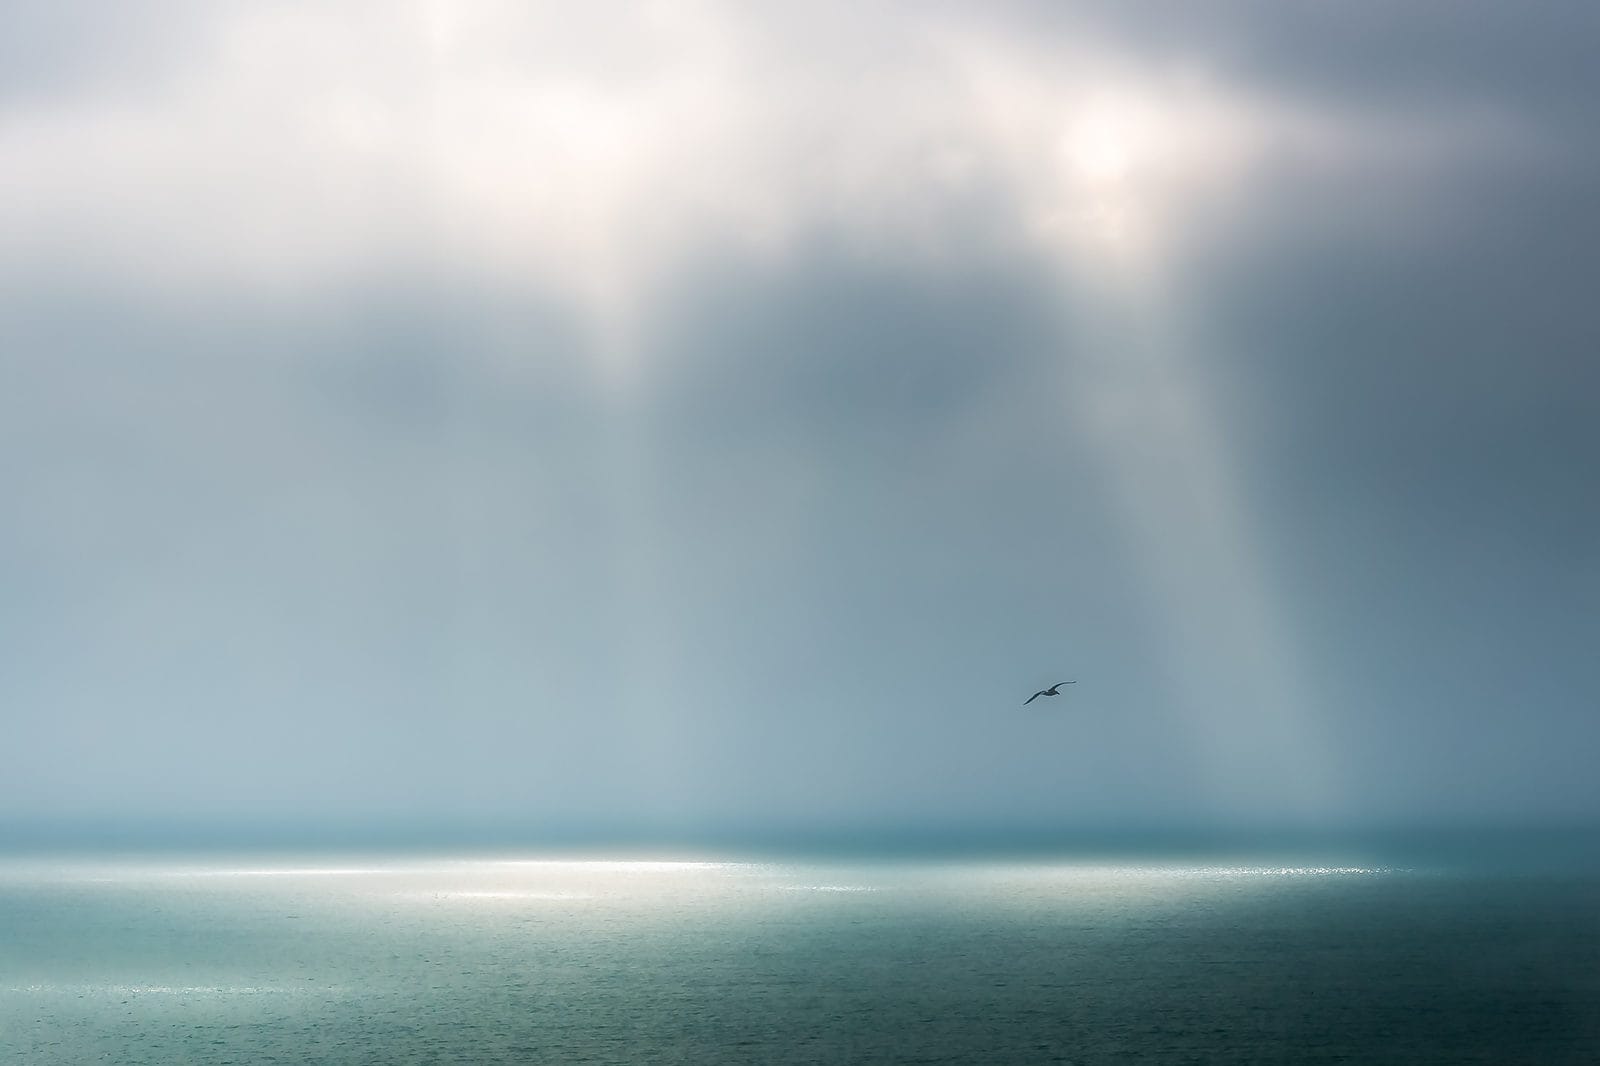 A one Seagull flying over the atlantic Ocean in West Cork, Ireland by Kieran Hayes: Landscape Photography Ireland.